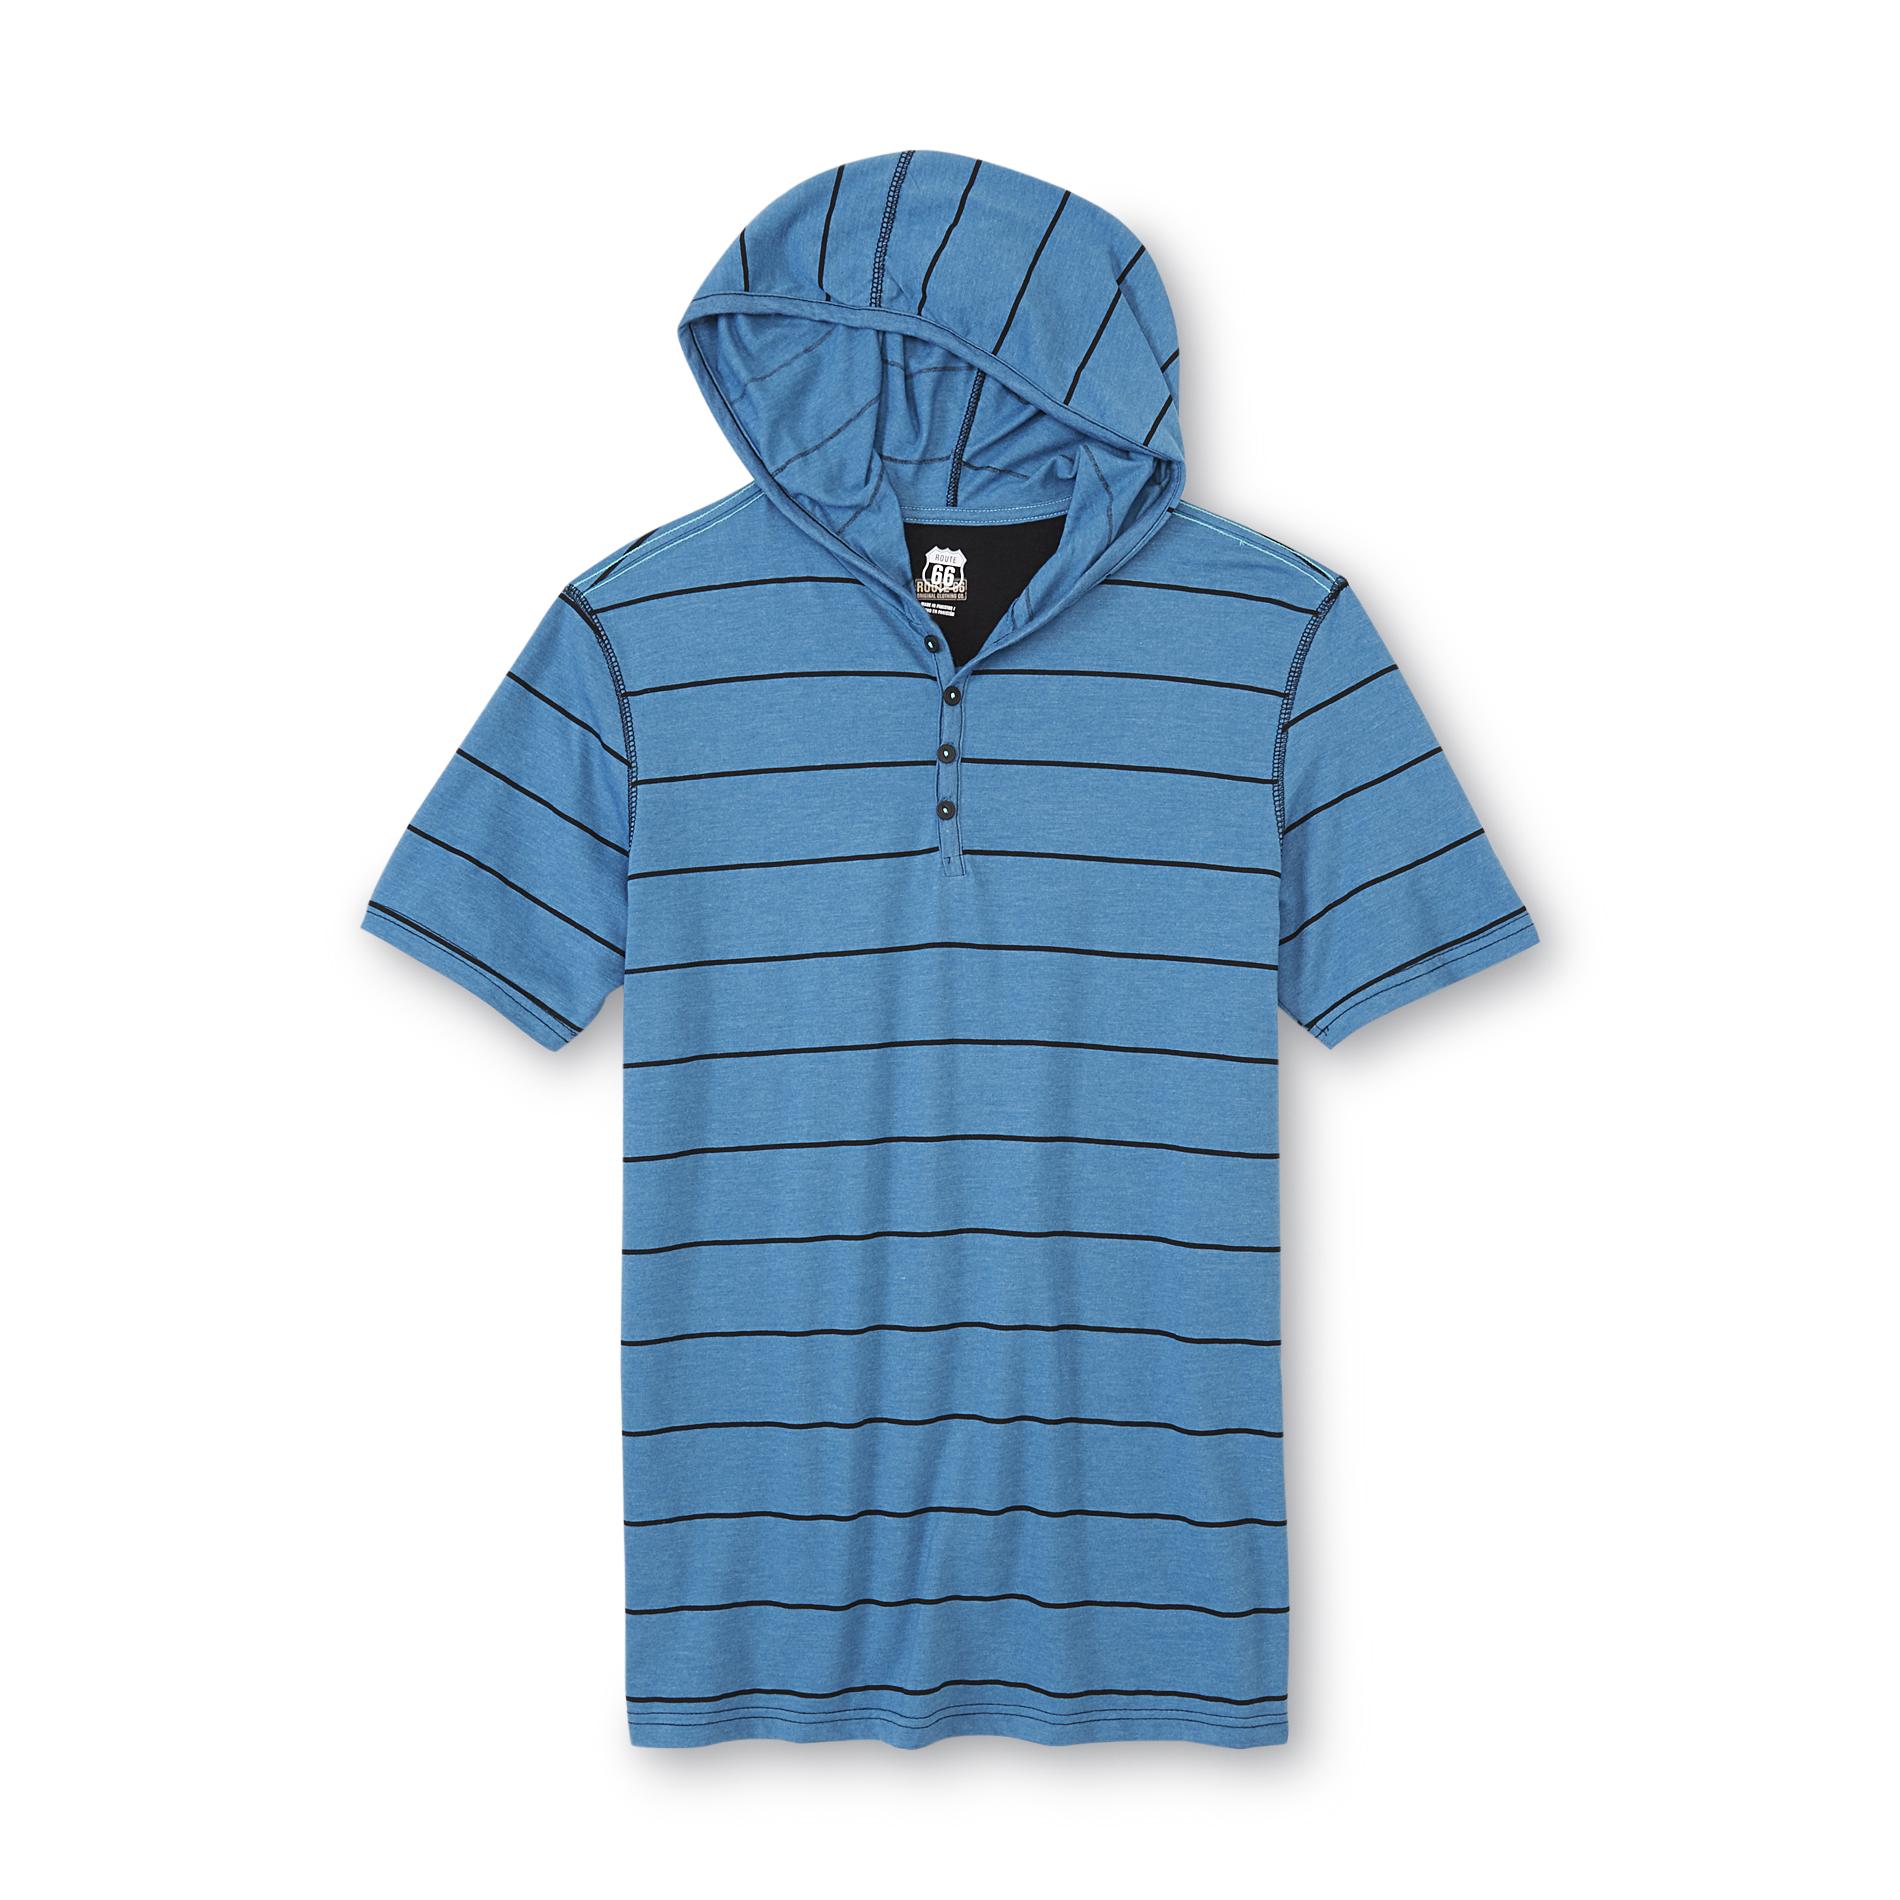 Route 66 Men's Hooded T-Shirt - Striped